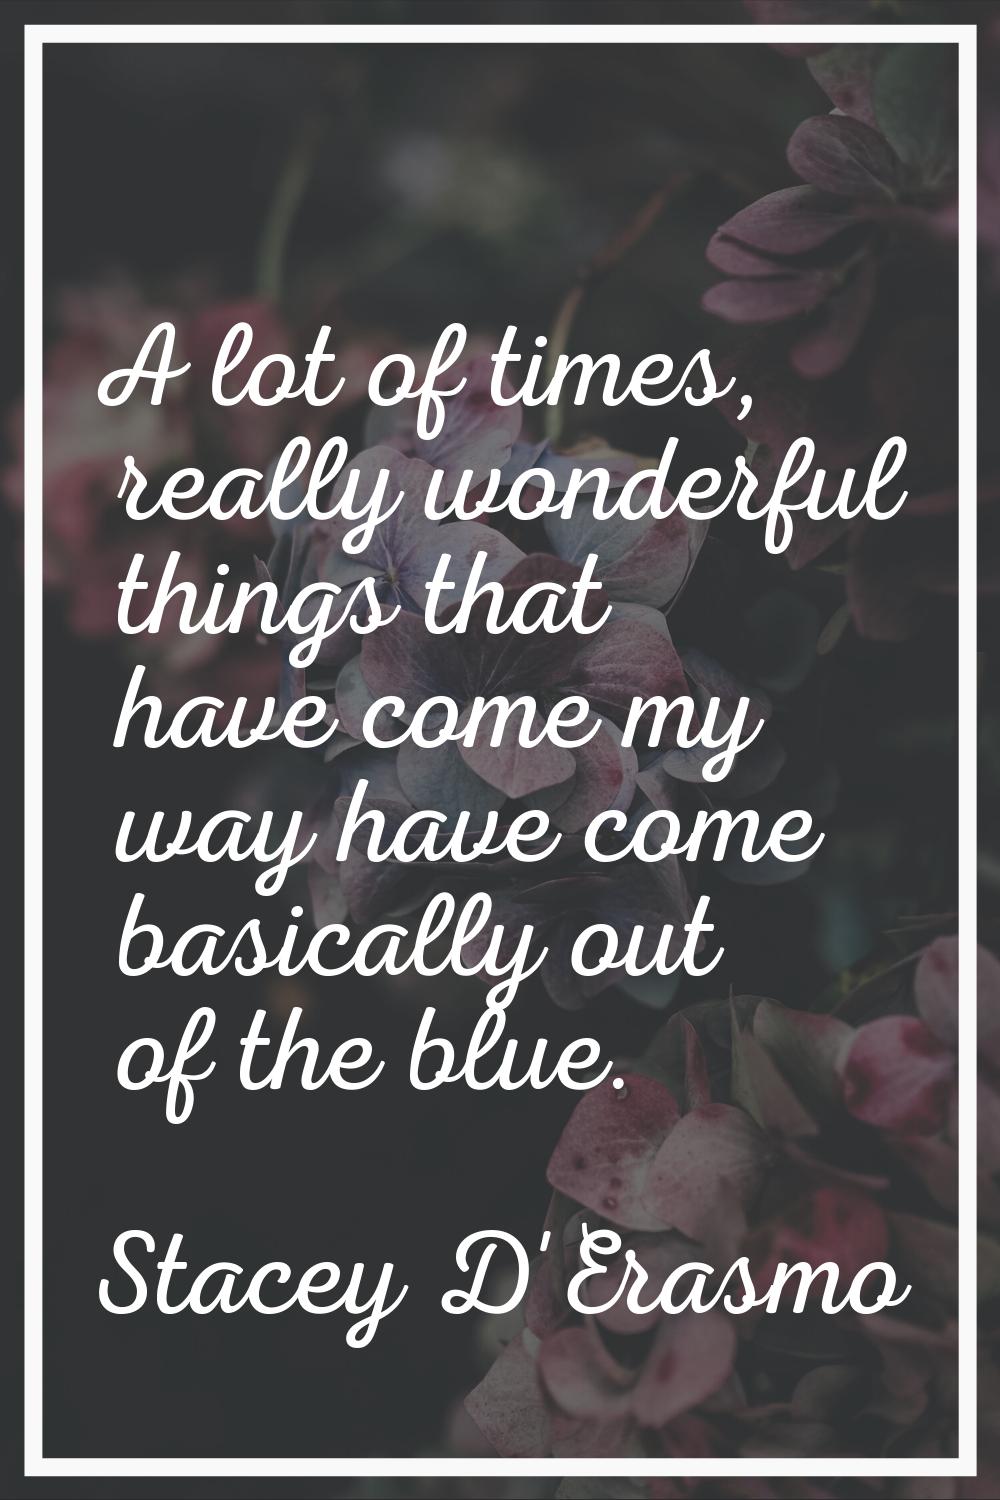 A lot of times, really wonderful things that have come my way have come basically out of the blue.